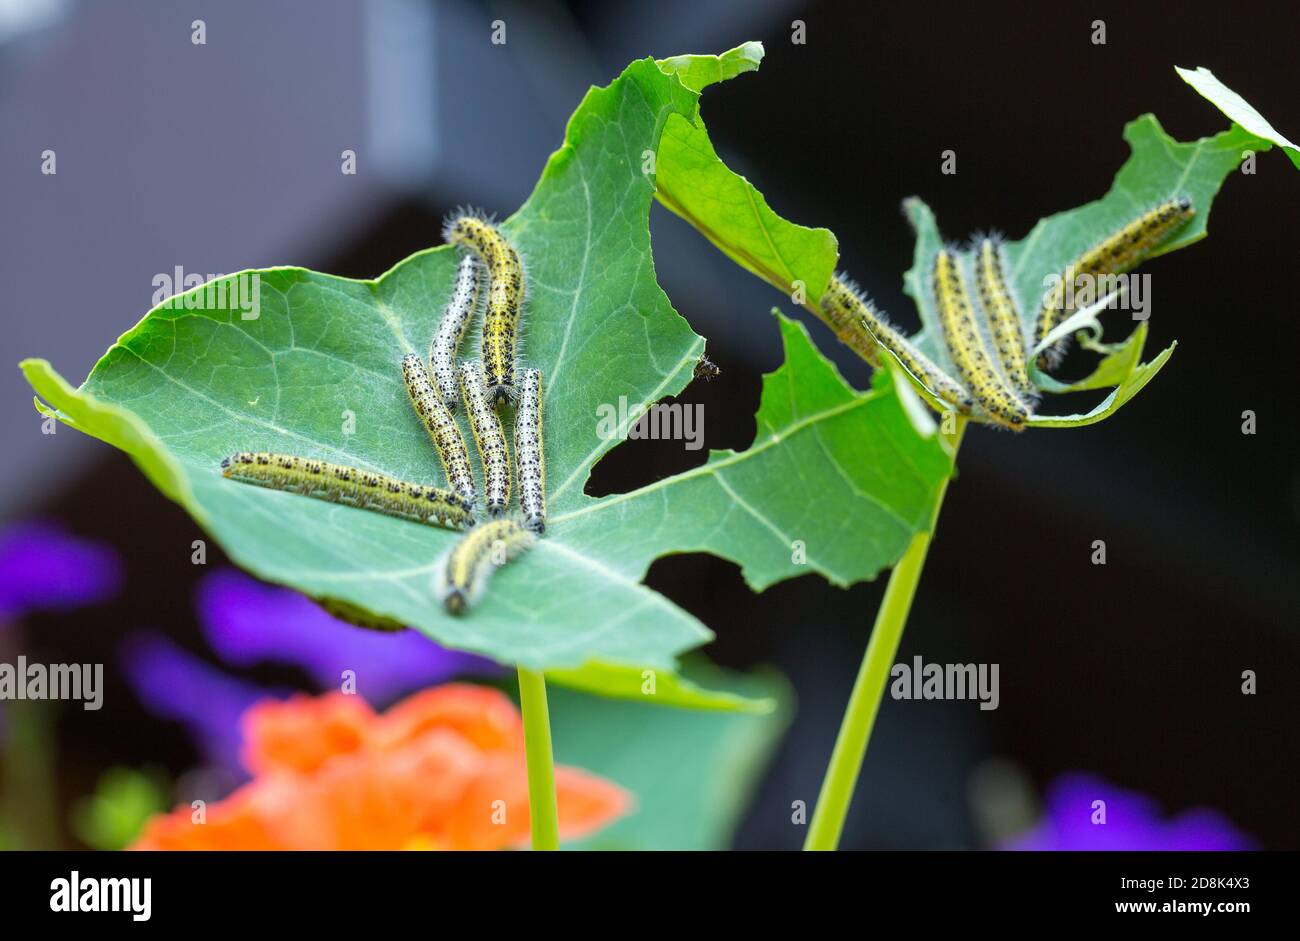 A cluster of white cabbage Butterfly caterpillars on a partially eaten nasturtium flower Stock Photo